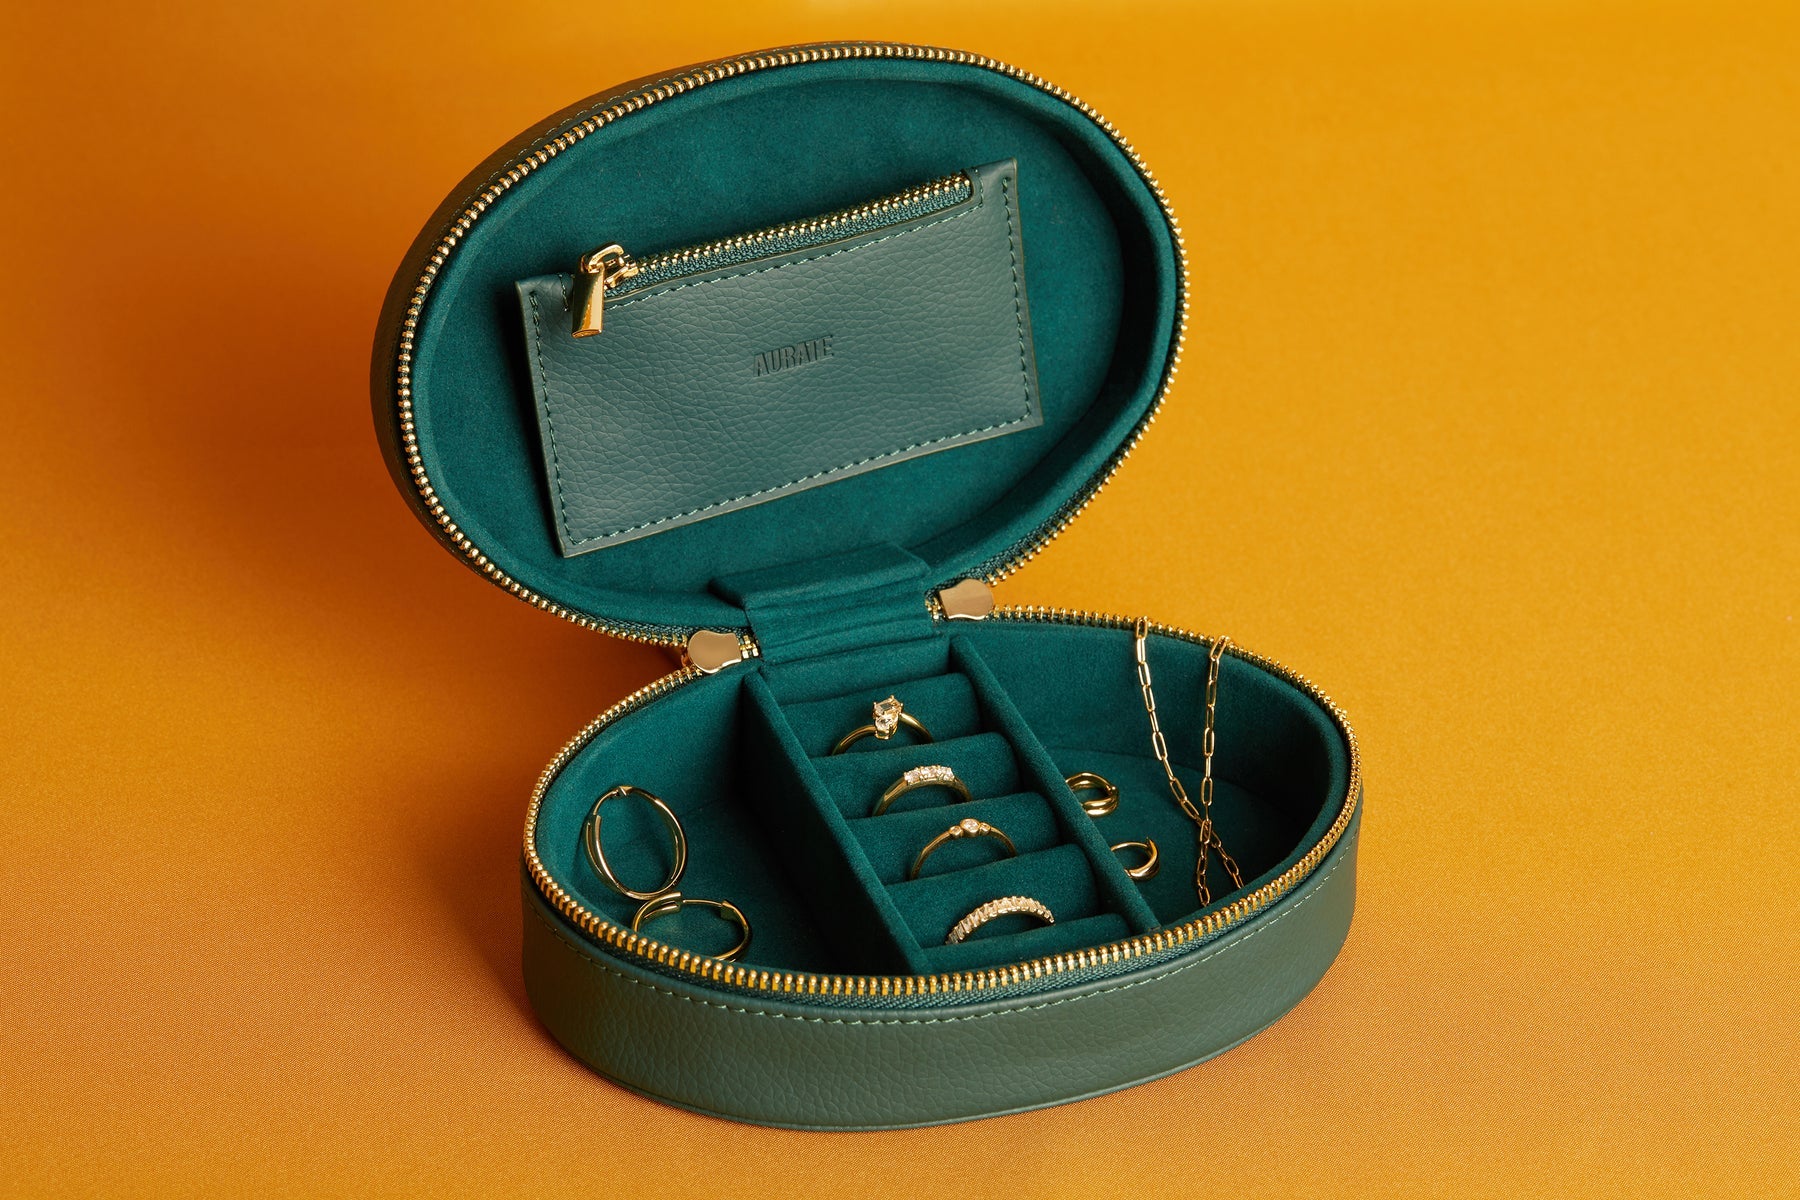 A green jewelry box containing rings and other jewelry